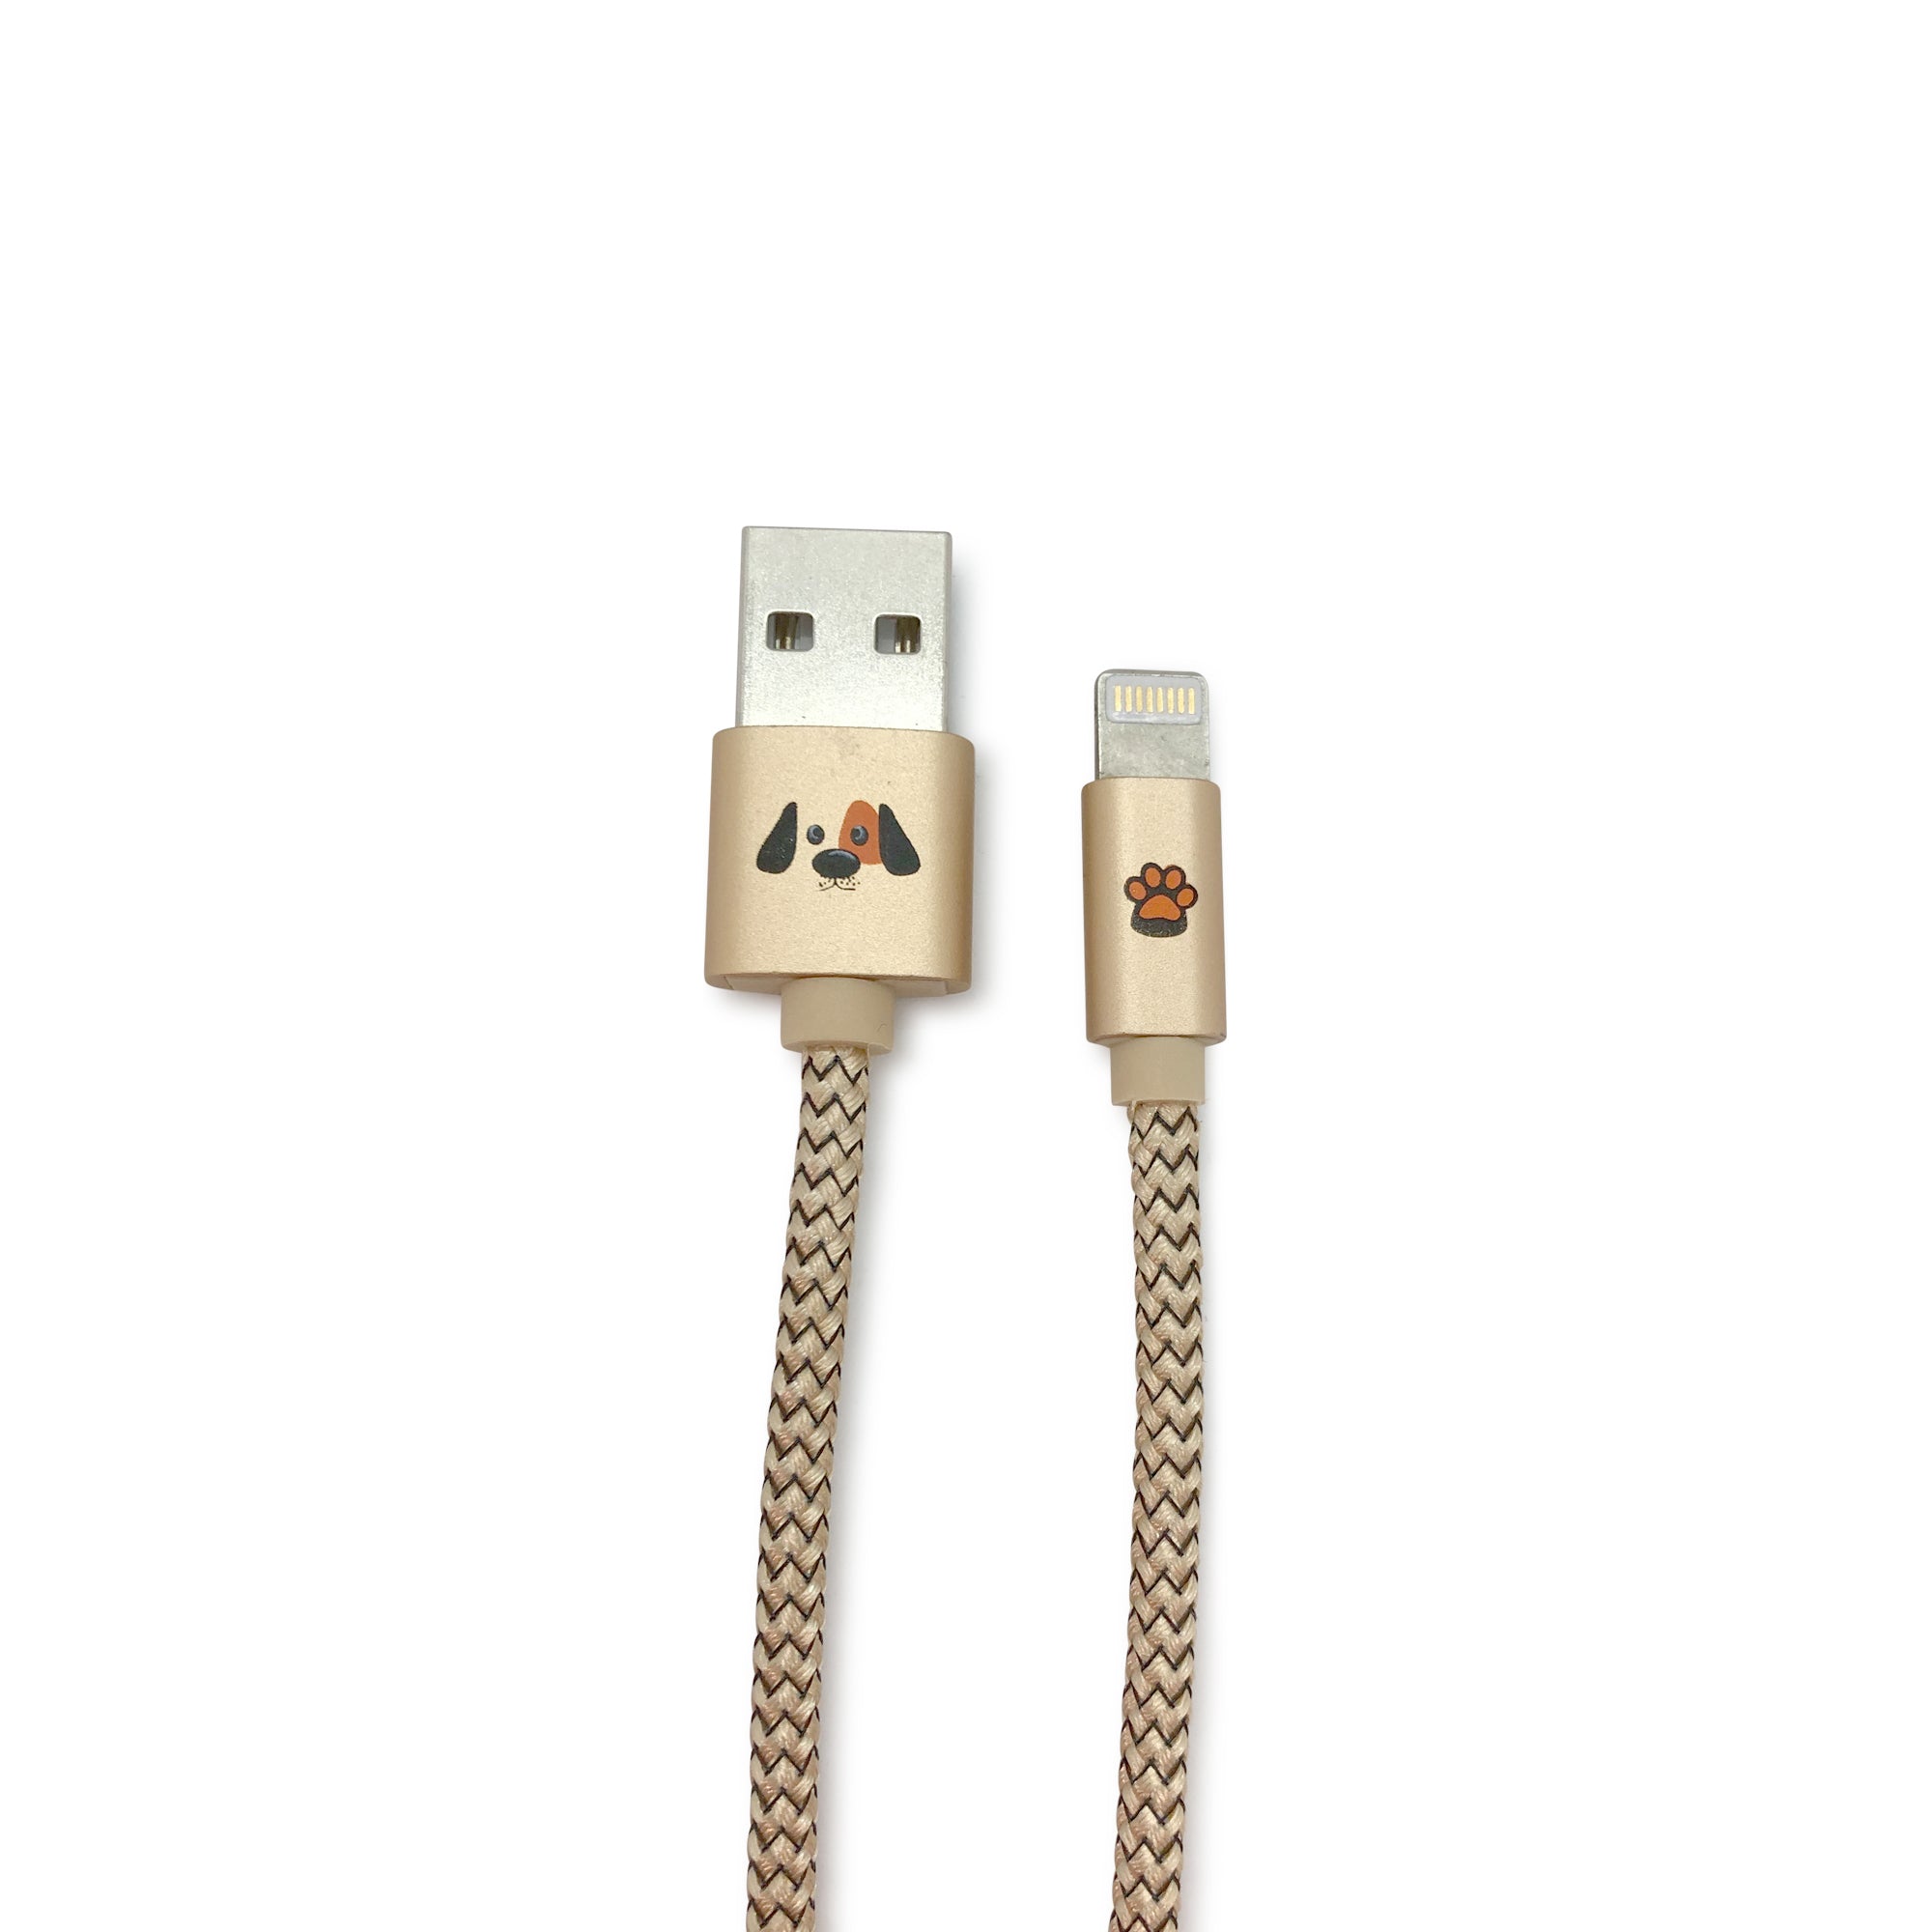 Lightning Cable, Nylon Braided Long Cord Fast Charging USB Sync Charger Cables Charging Cord for iPhone and iPad - Cute Cat and Dog Design (3 Feet/0.9 Meter) 04